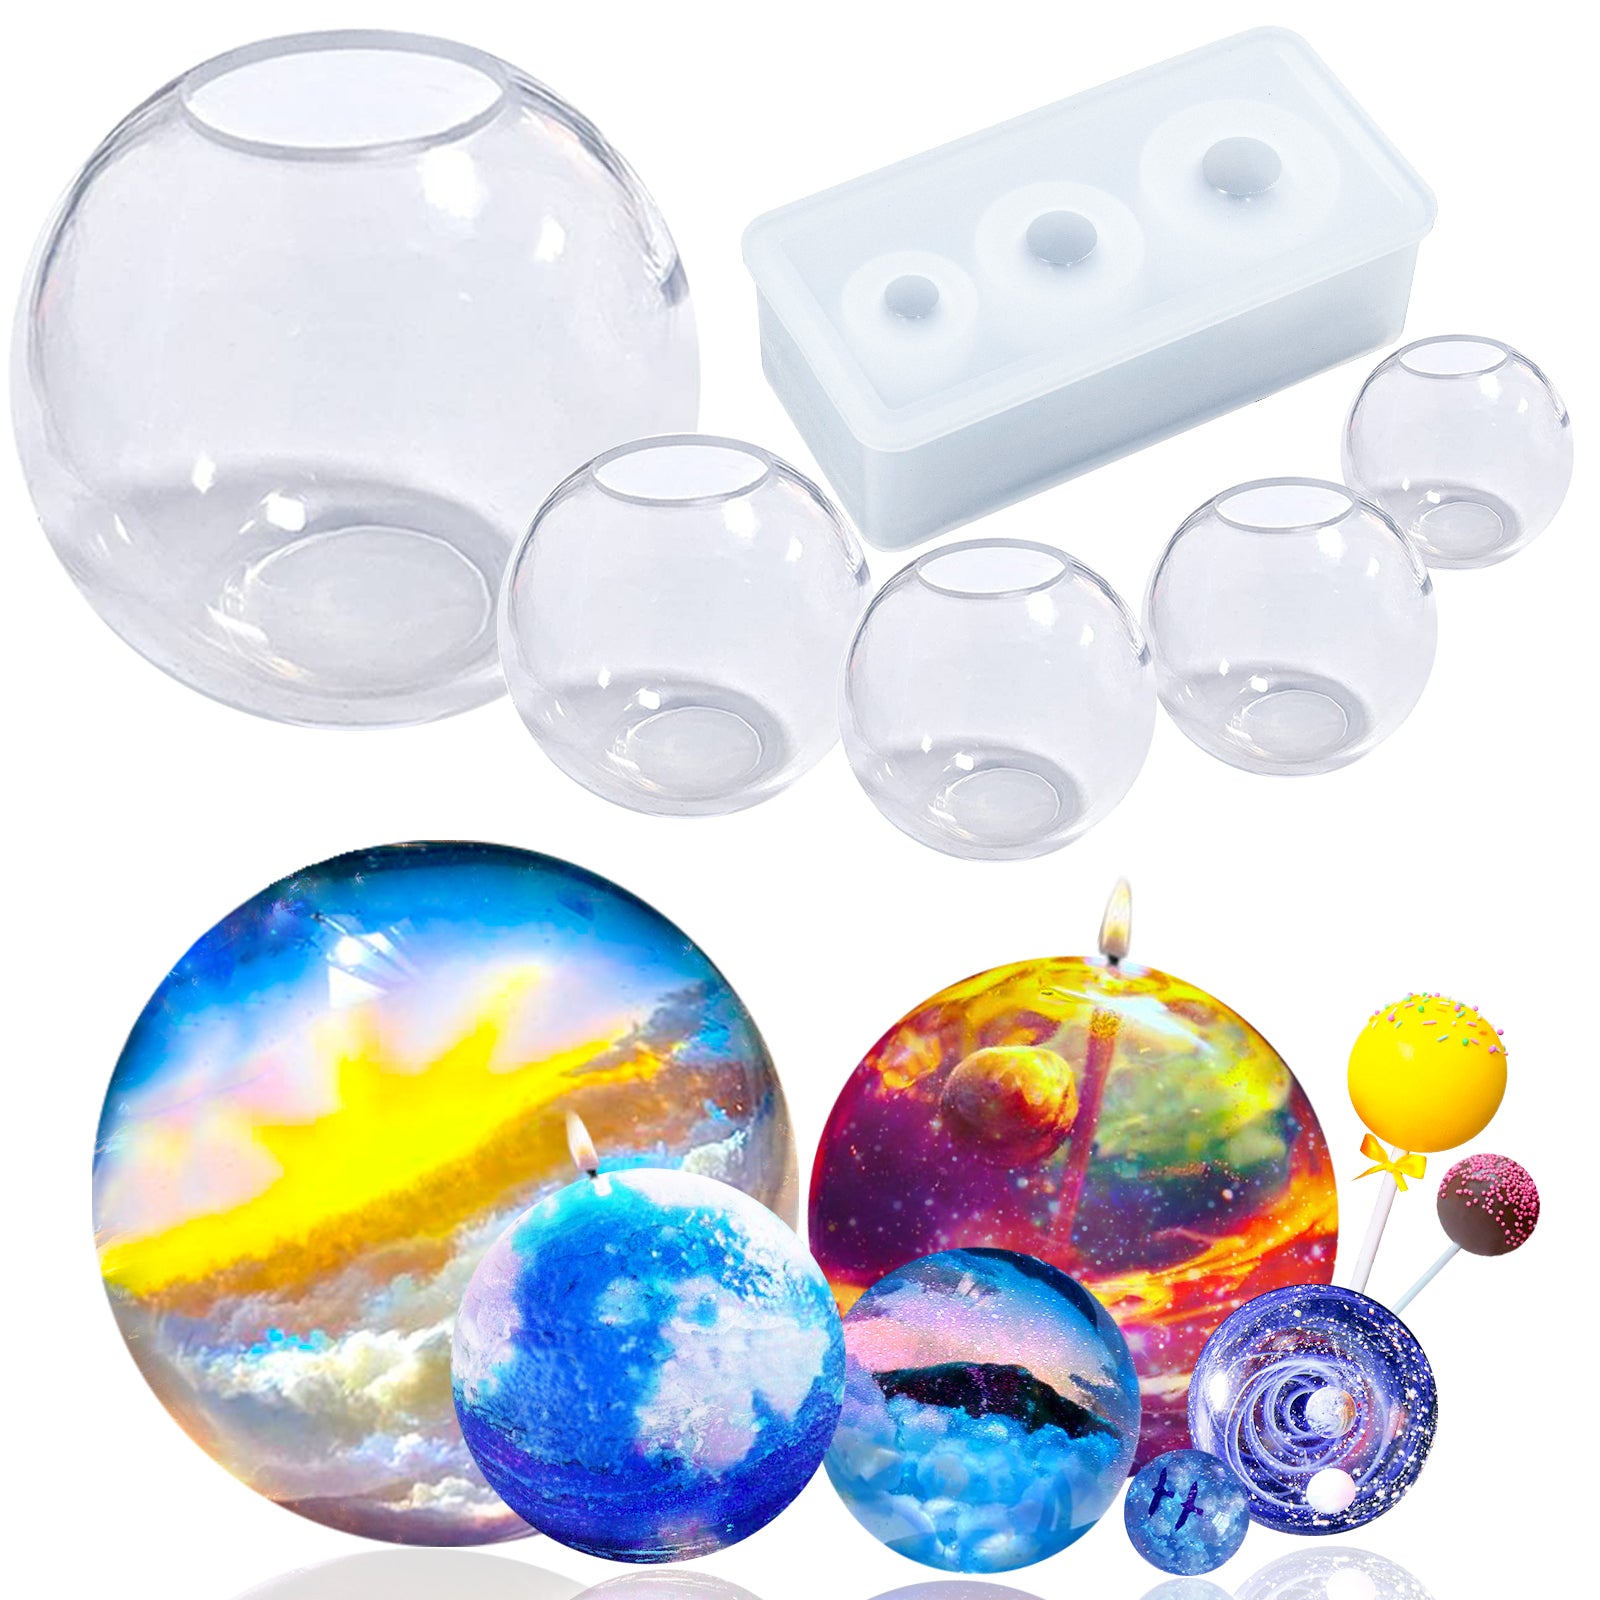 FUNSHOWCASE 4inch Large Sphere Round Silicone Mold for Resin Epoxy, Jewelry  Making, Candle Wax, Homemade Soap, Bath Bomb